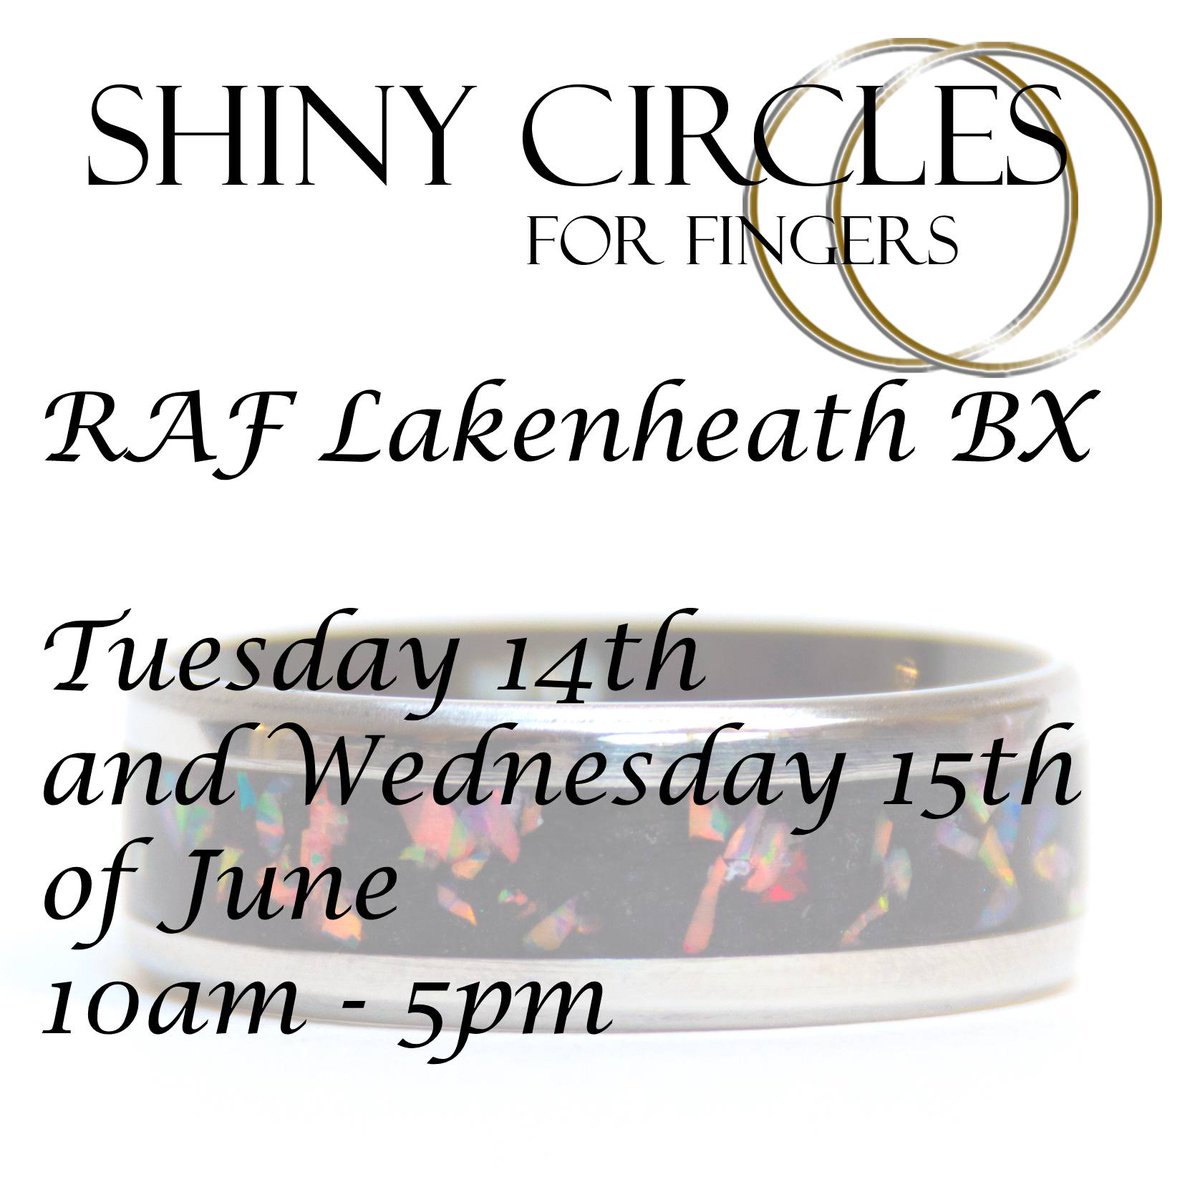 We are the RAF Lakenheath BX today and tomorrow. (14th & 15th June). Come and see the latest sample rings. #raflakenheath #SmallBusiness #smallbusinessuk #ringmaking #ringcraft